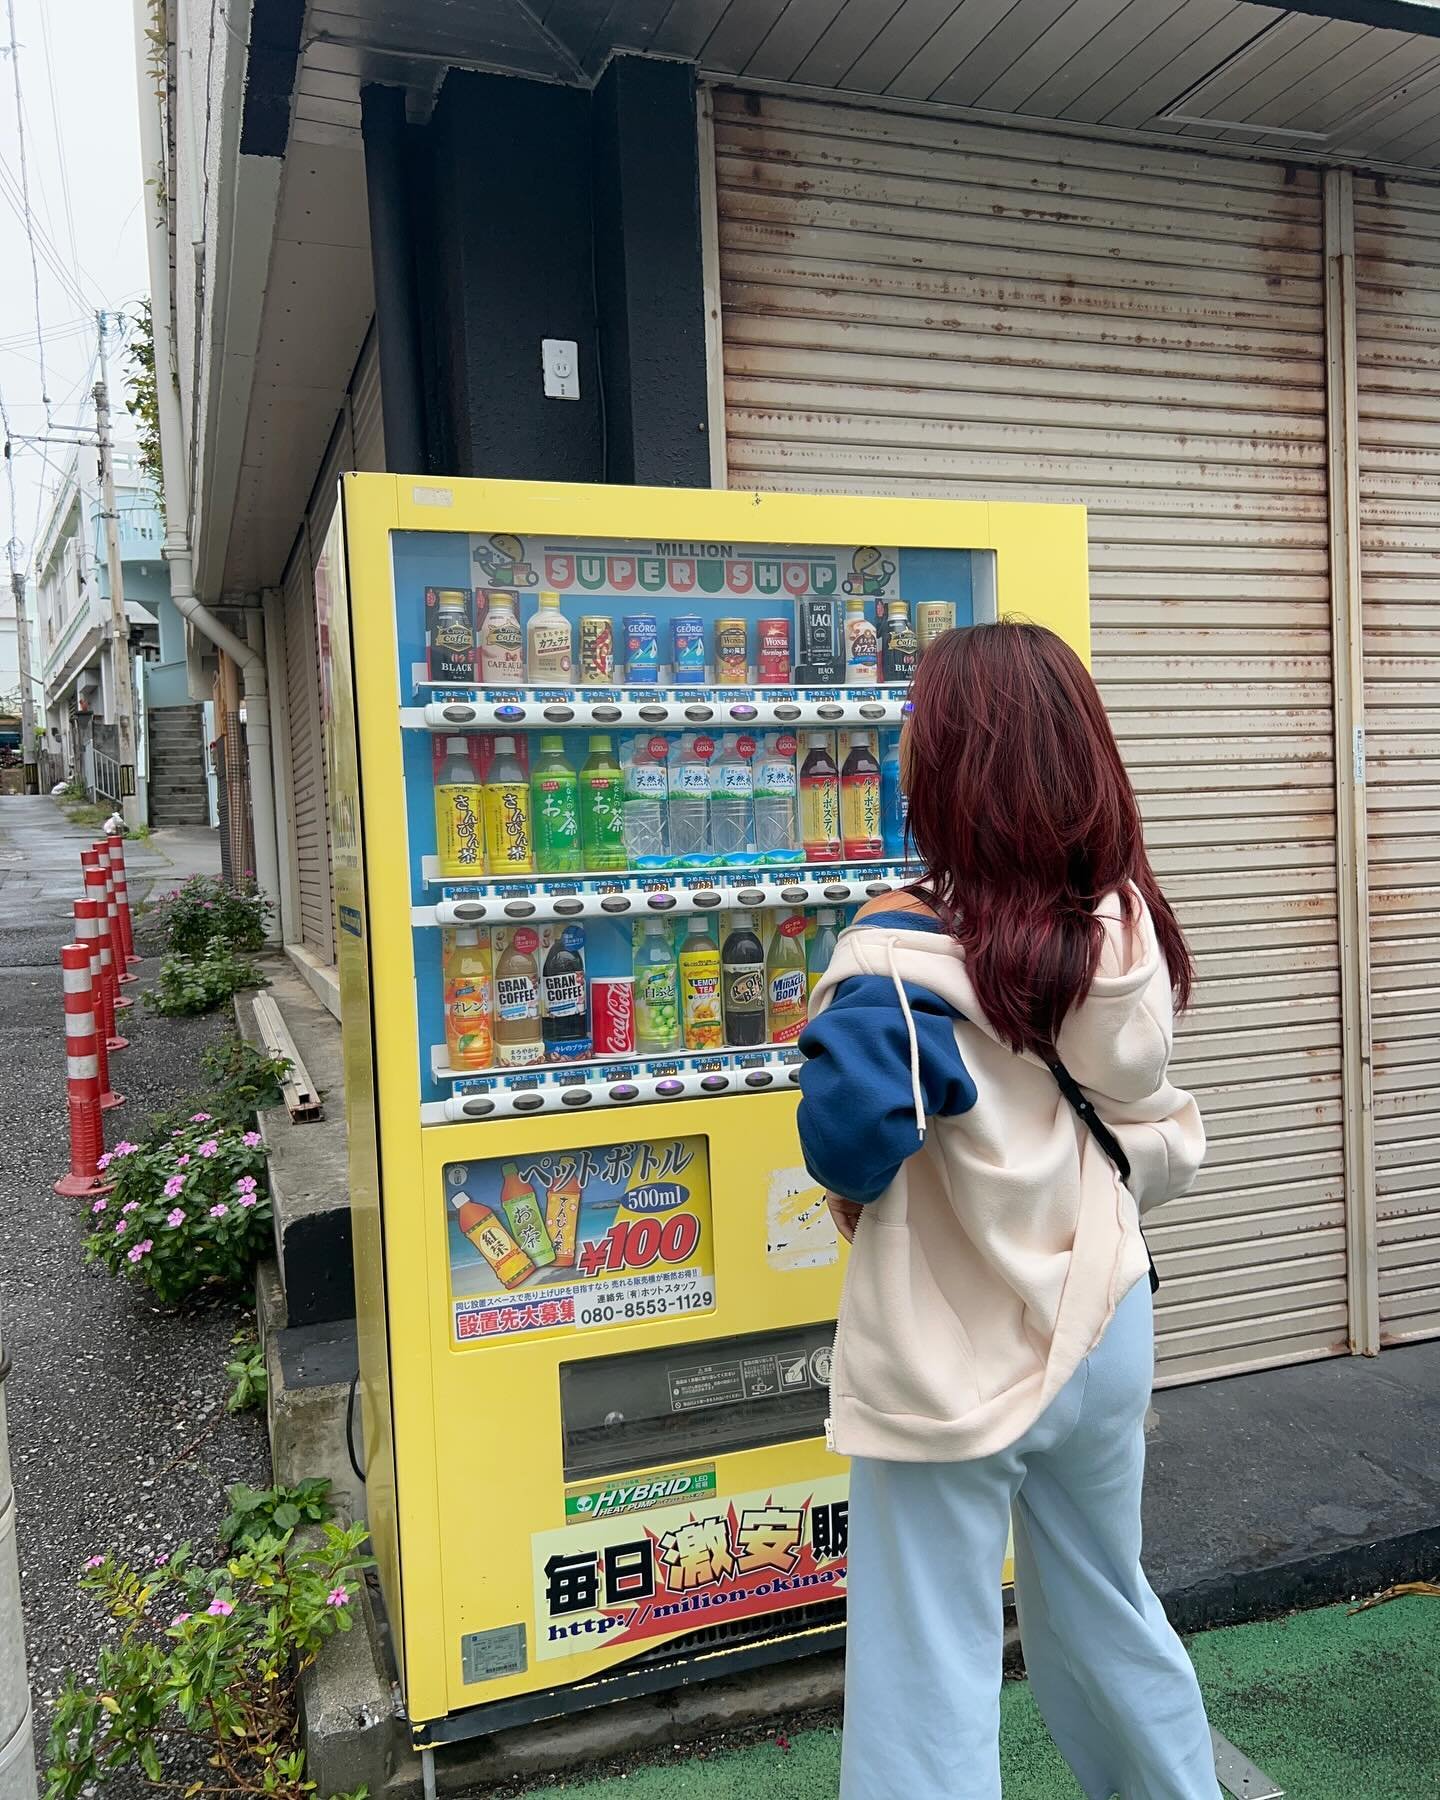 just another vending machine snap !! 🧃